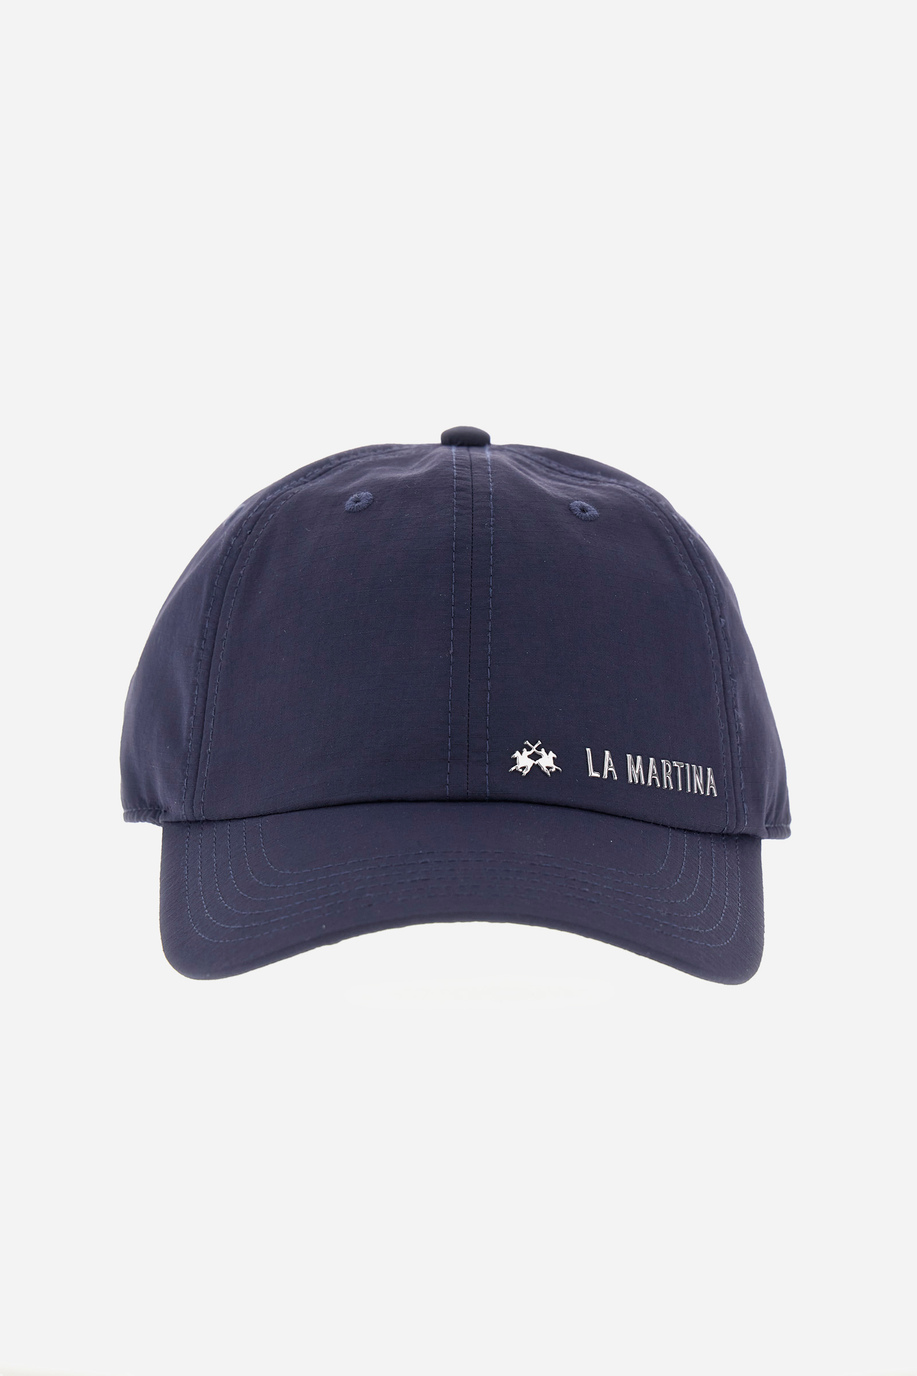 La Martina women's hats: discover the online collection